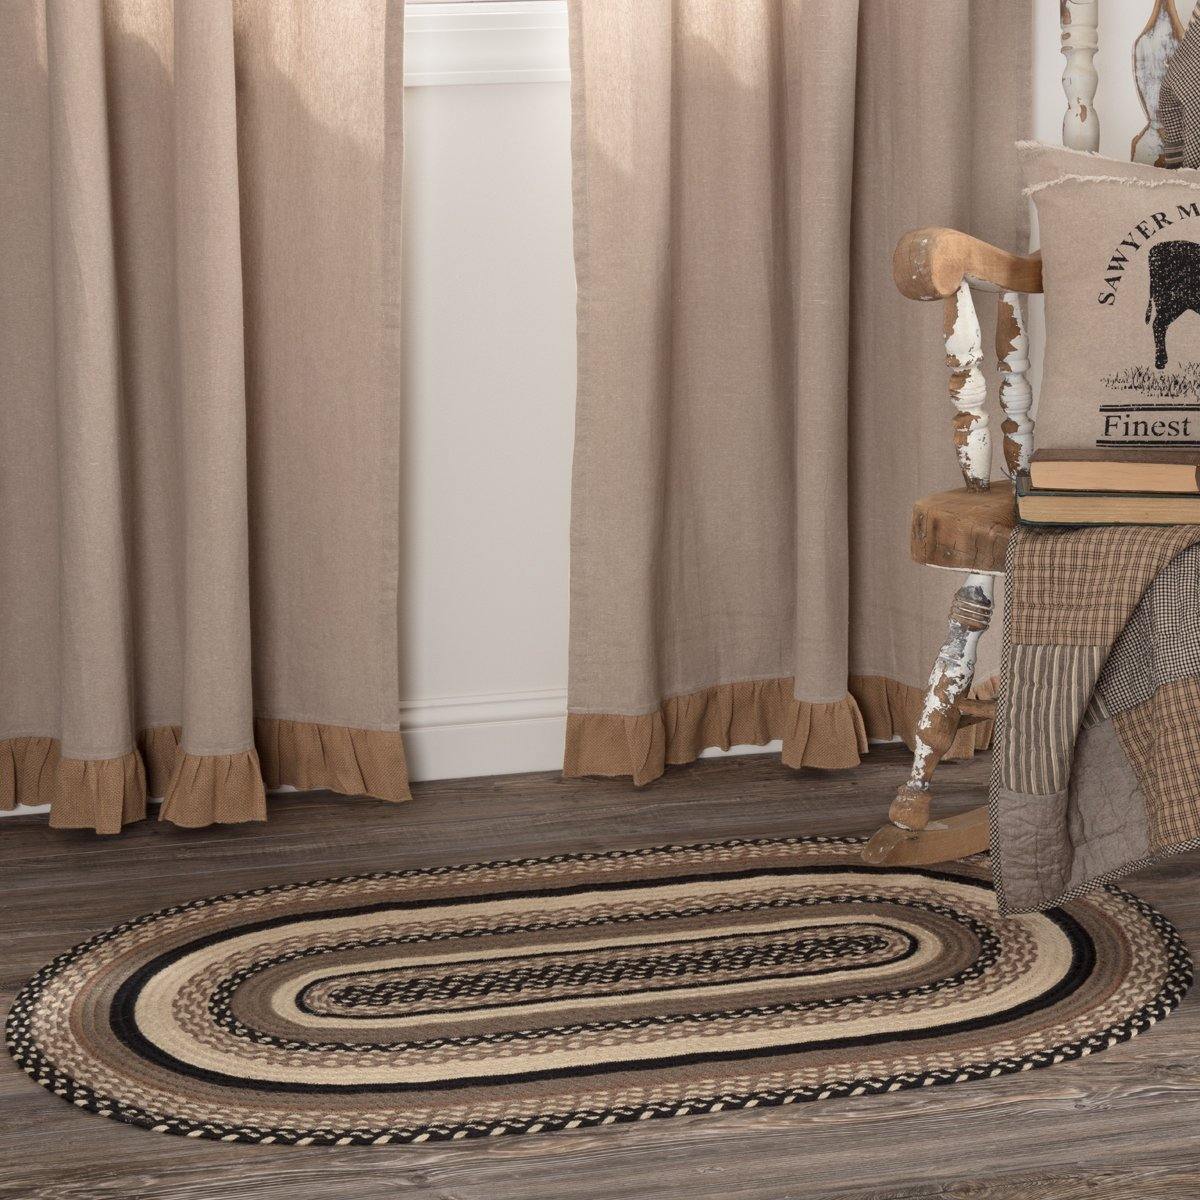 Sawyer Mill Charcoal Jute Braided Rug Oval 27"x48" with Rug Pad VHC Brands - The Fox Decor